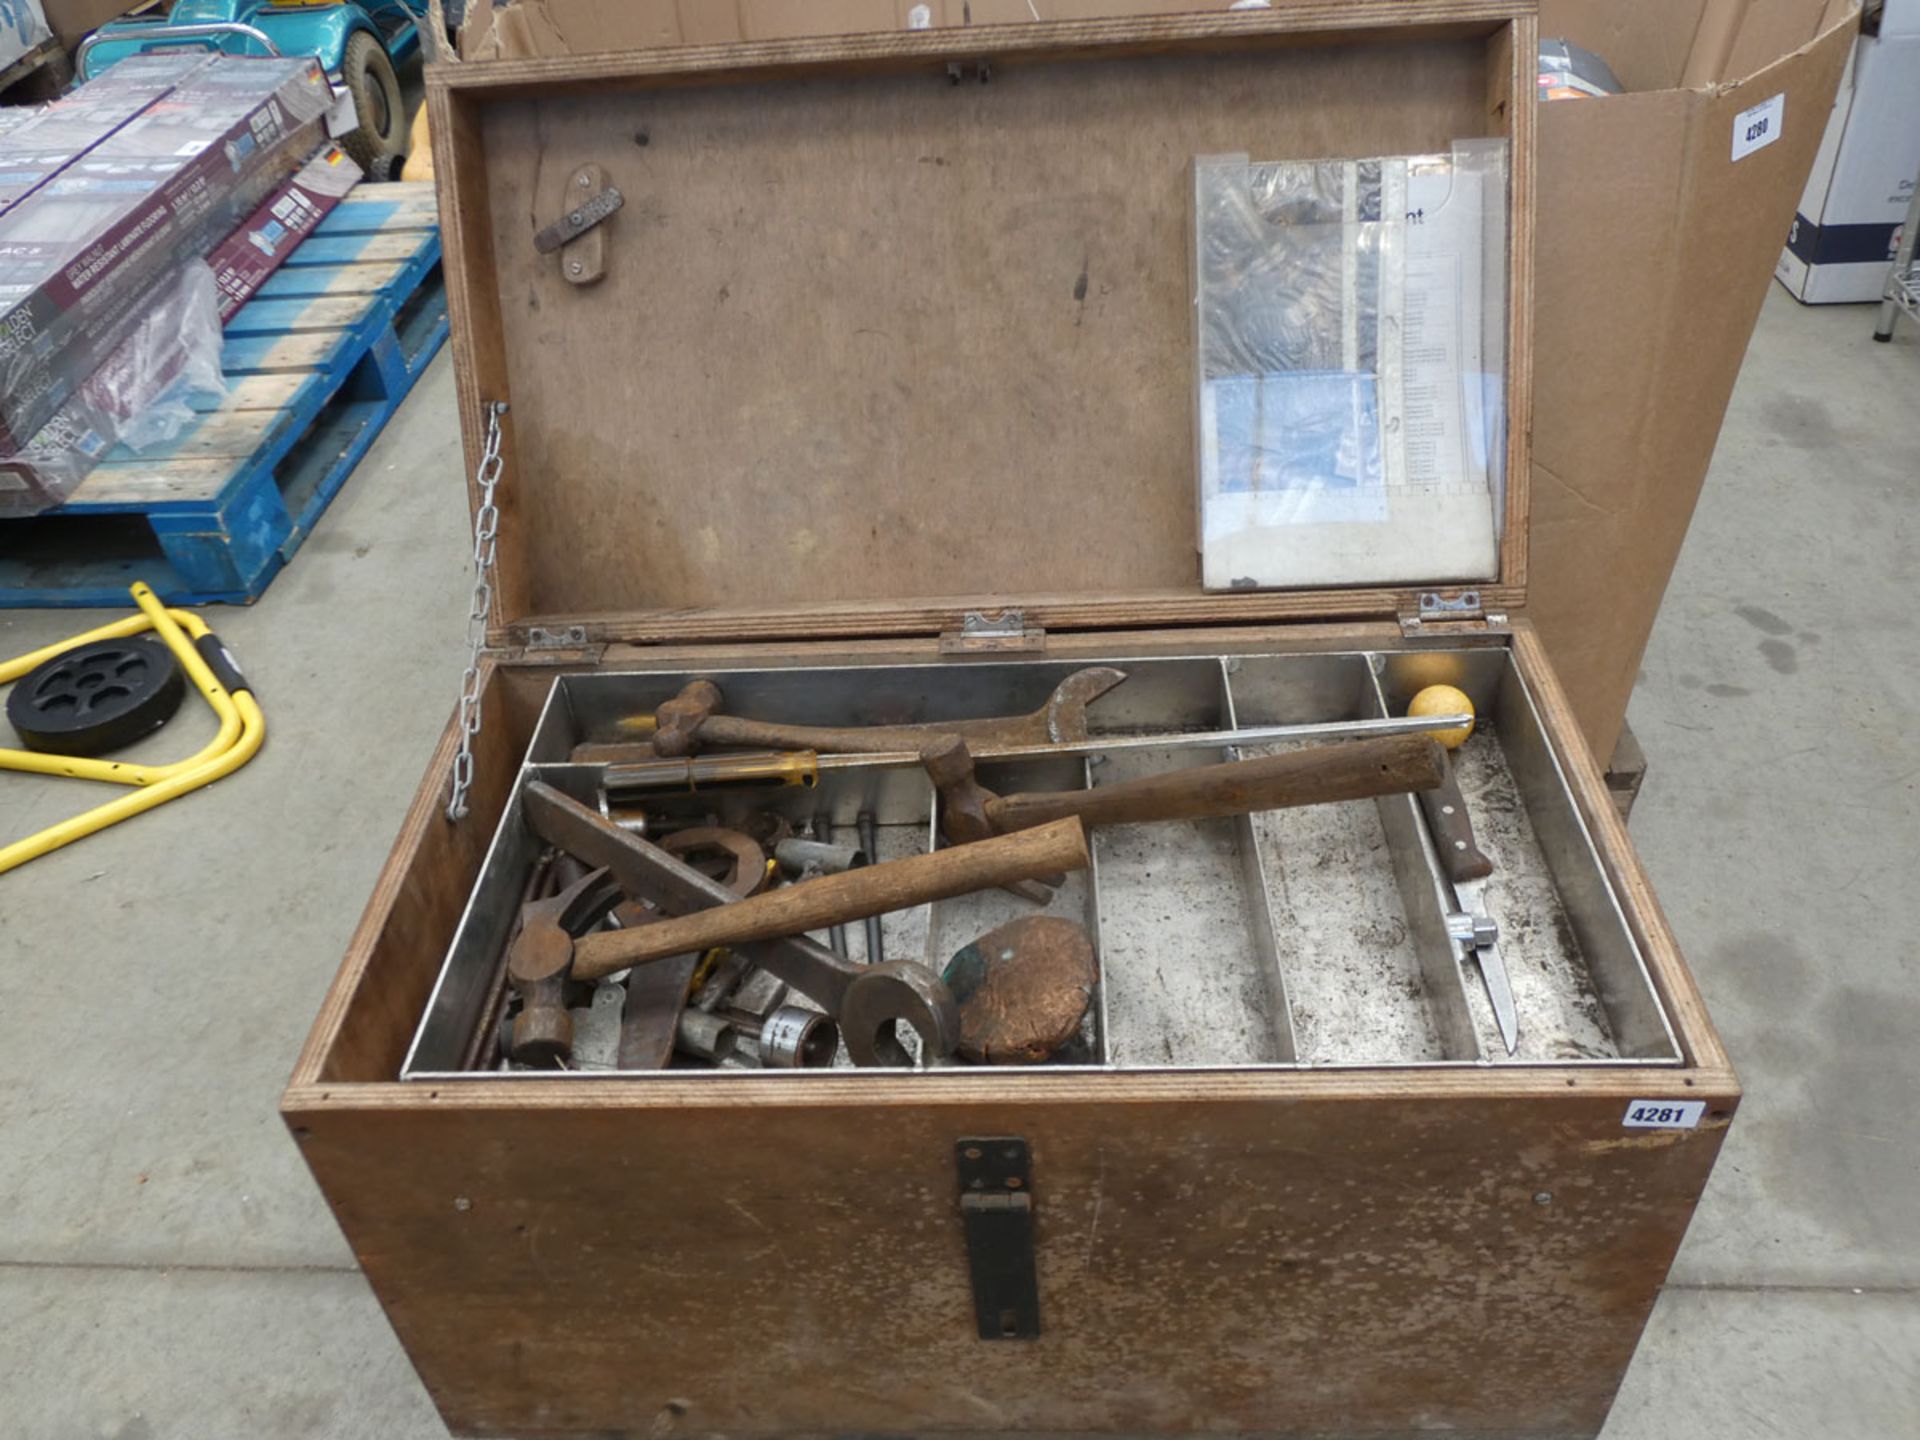 Wooden box containing large heavy duty spanners, hammers, screwdrivers, and various other tools